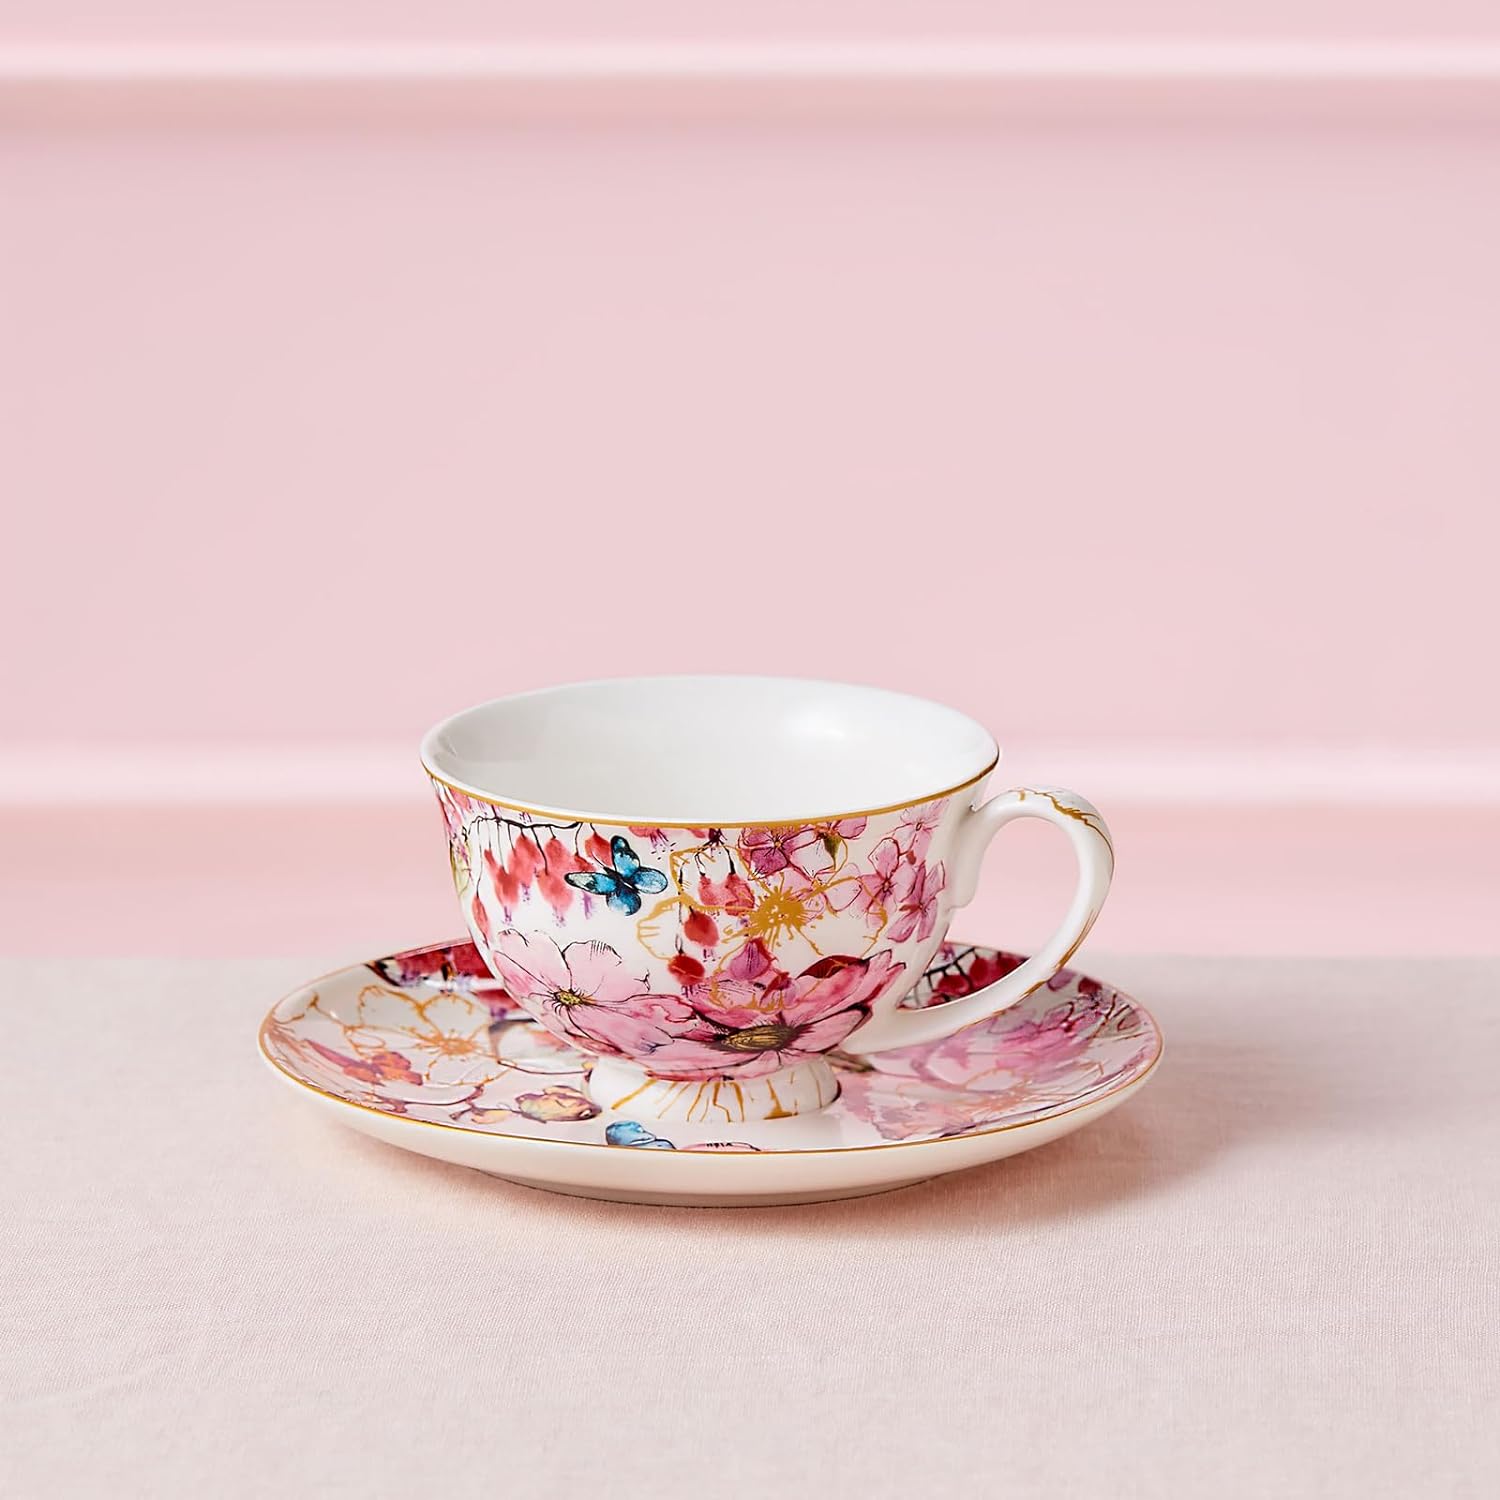 "Enchantment" Cup and Saucer